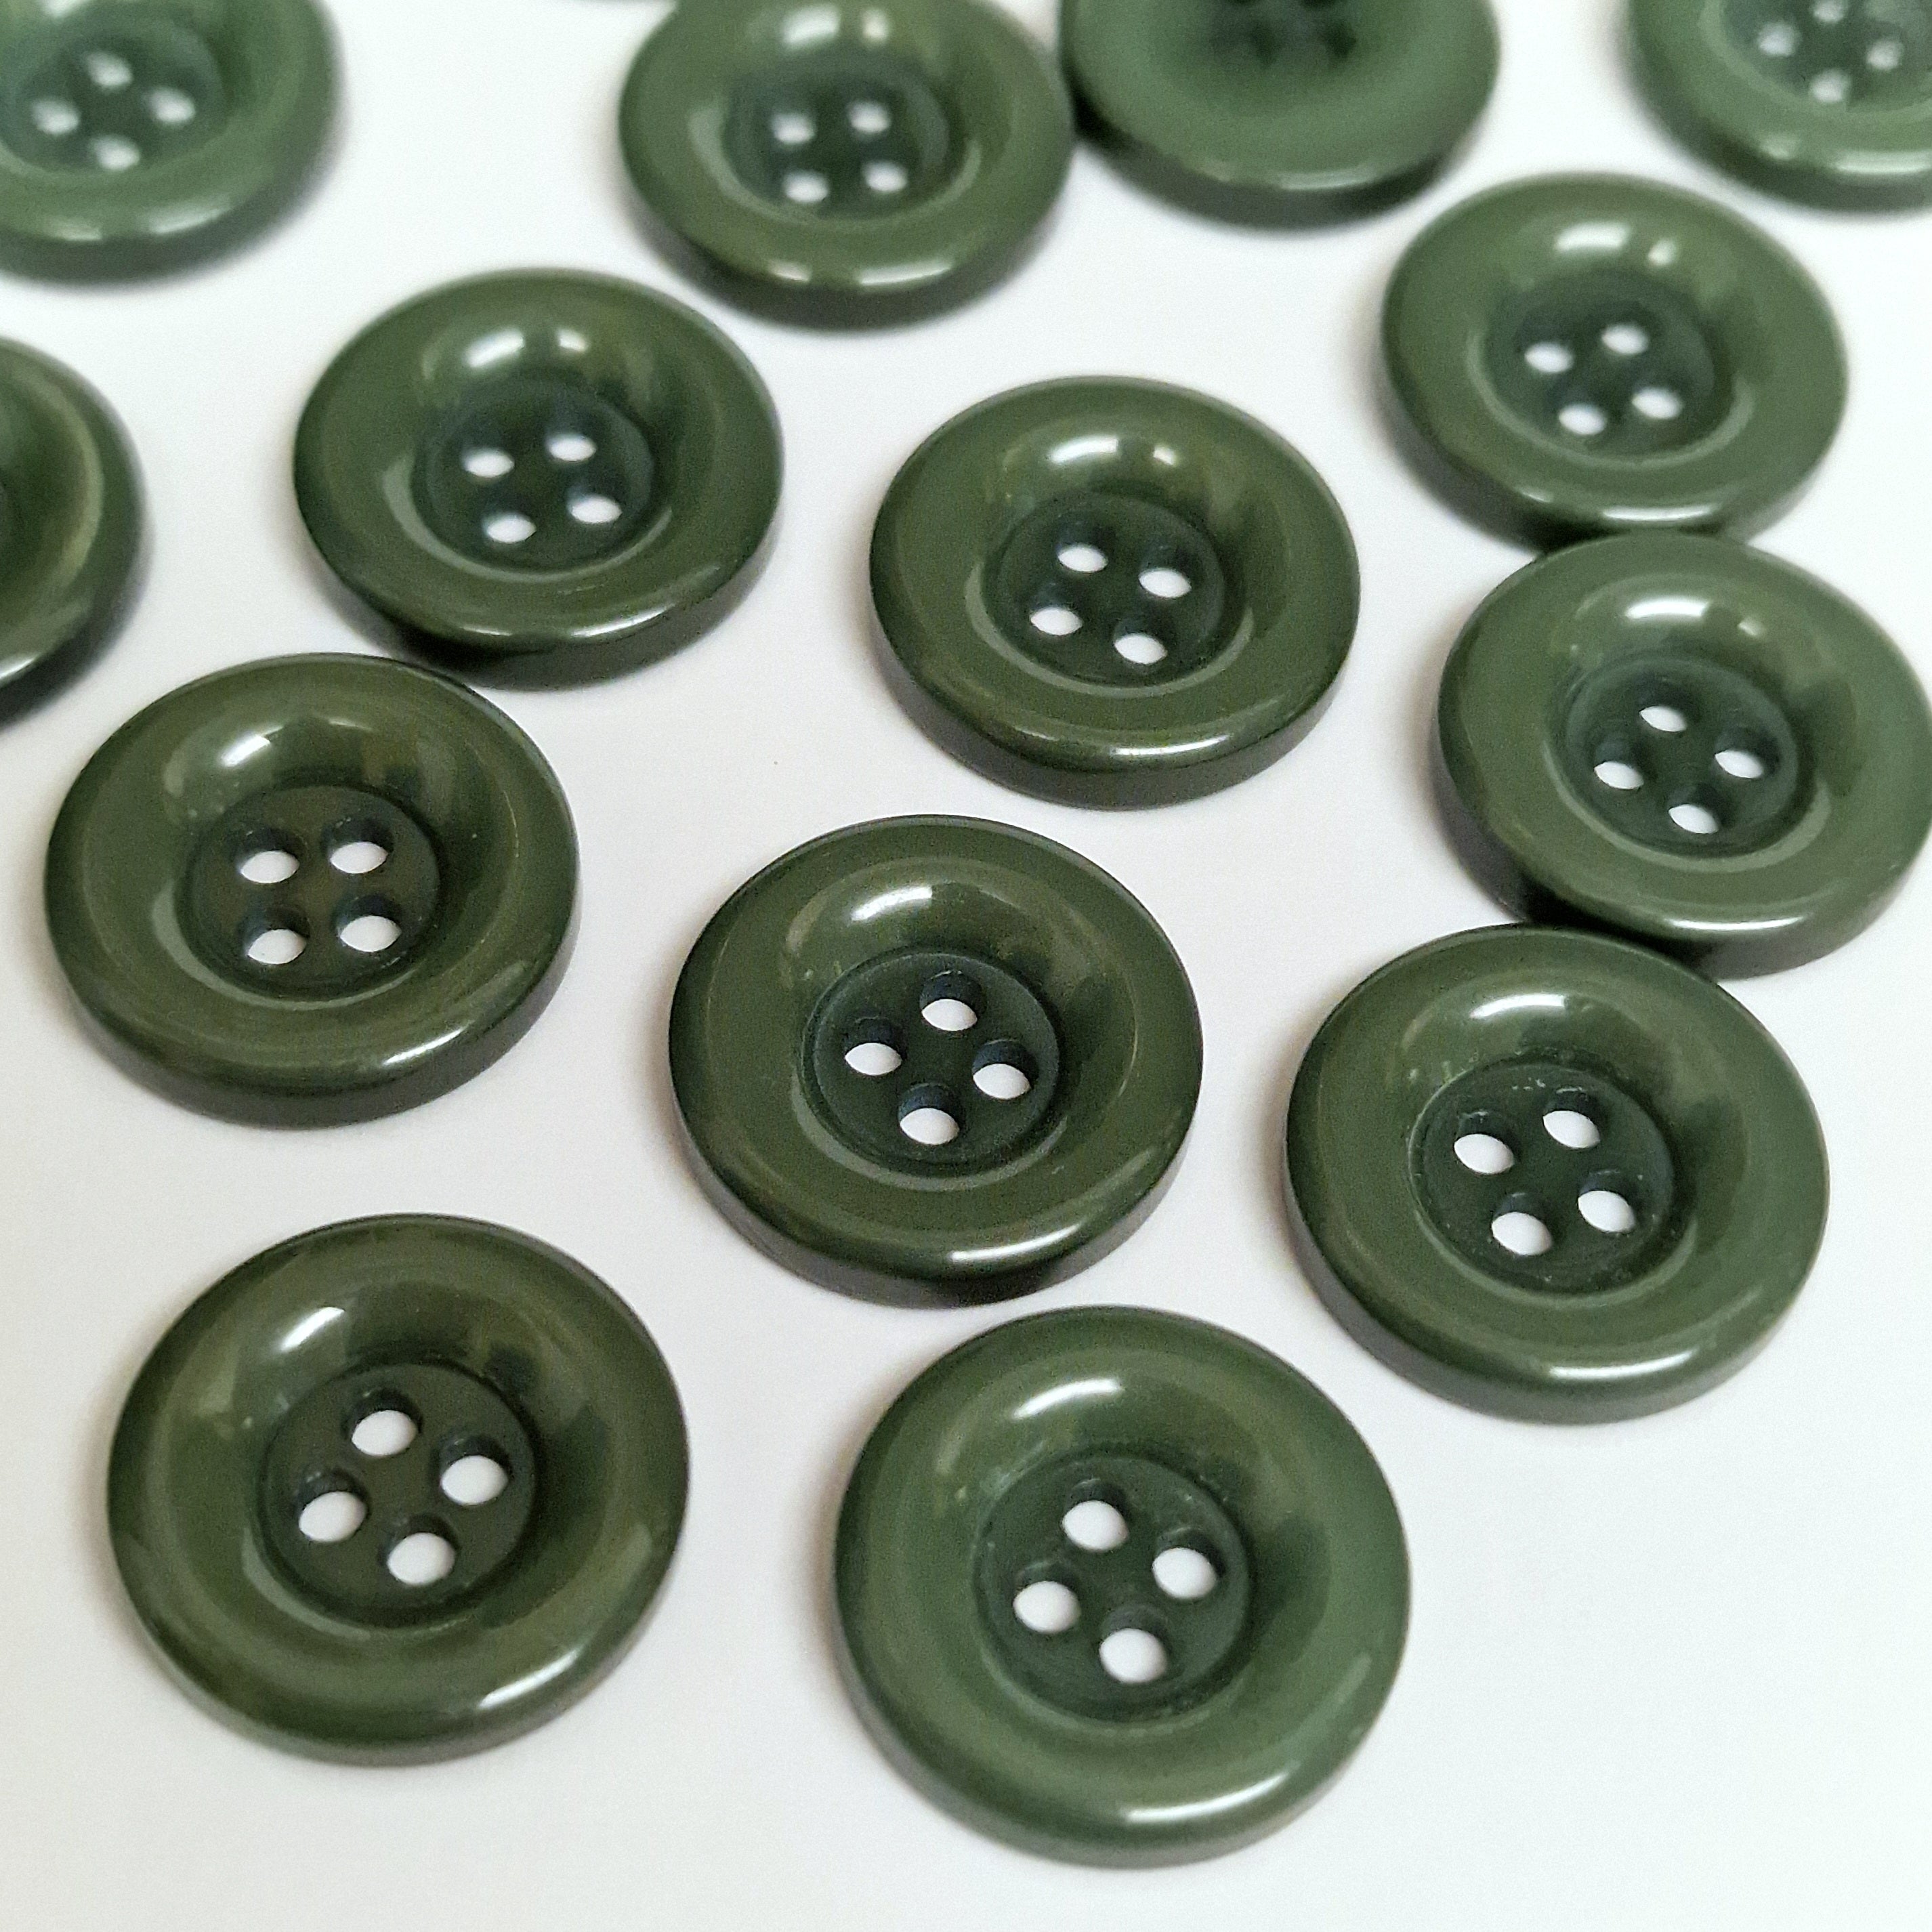 MajorCrafts 48pcs 15mm Olive Green 4 Holes Thick Edge Round Resin Sewing Buttons